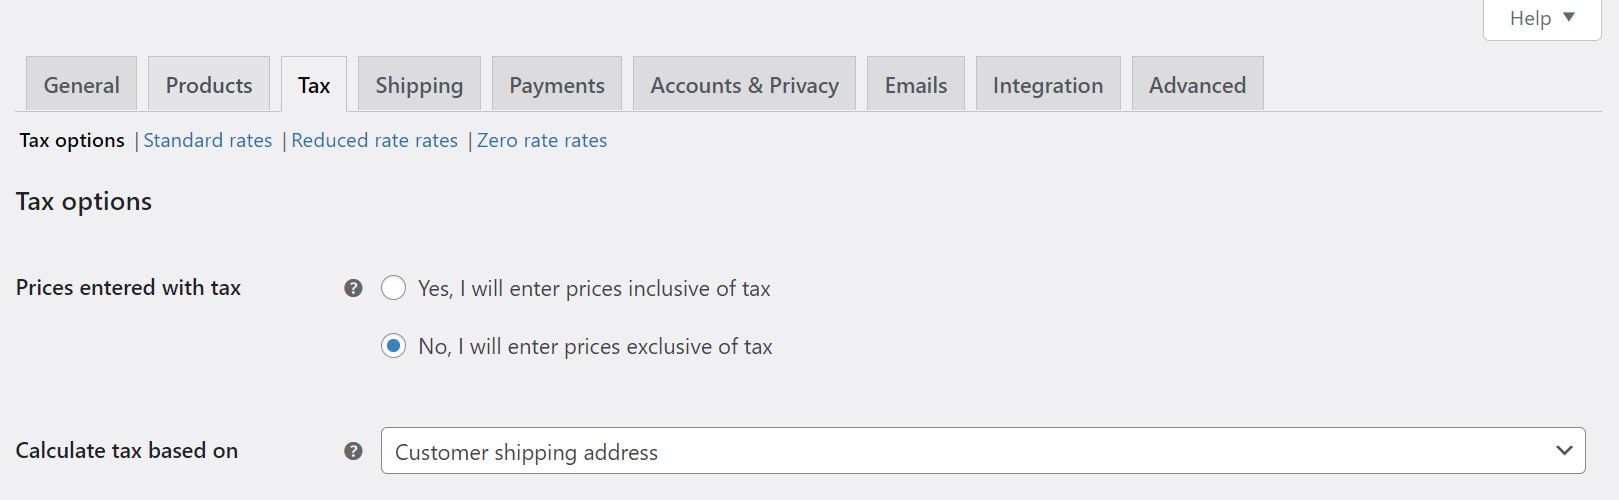 The tax options page in WooCommerce